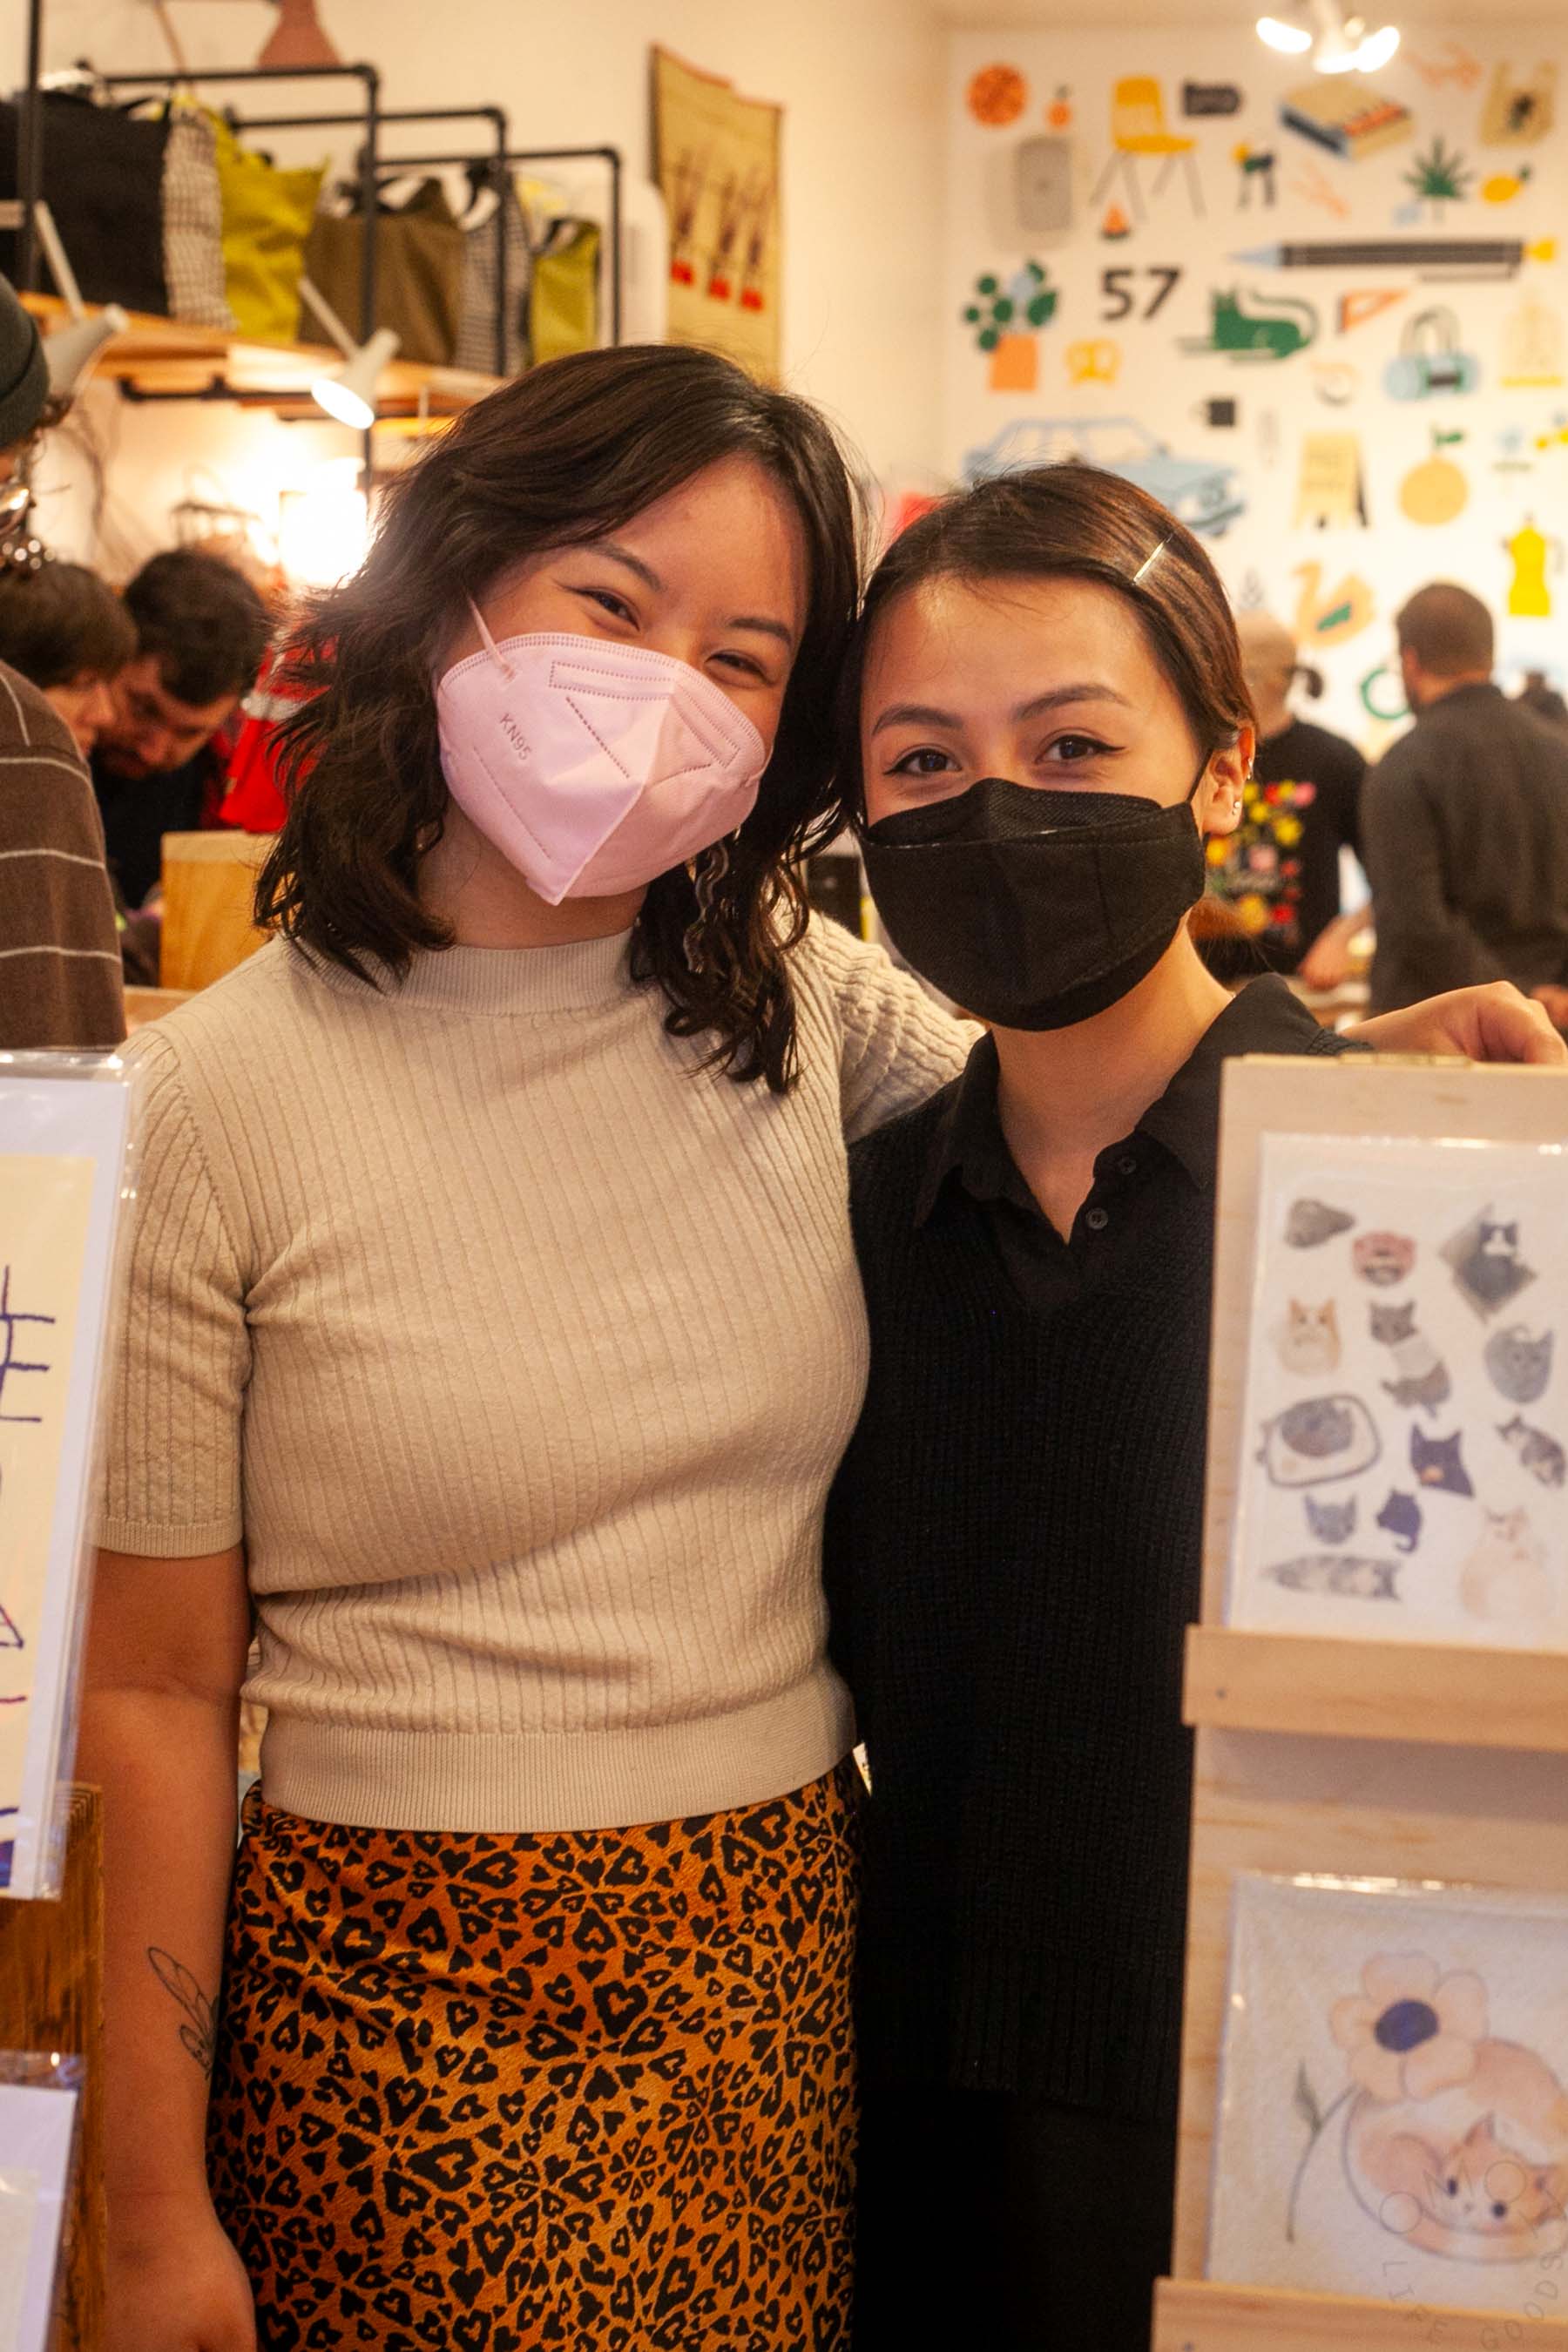 Hannah poses with shop staff V who organized the First Friday. Both wear masks.